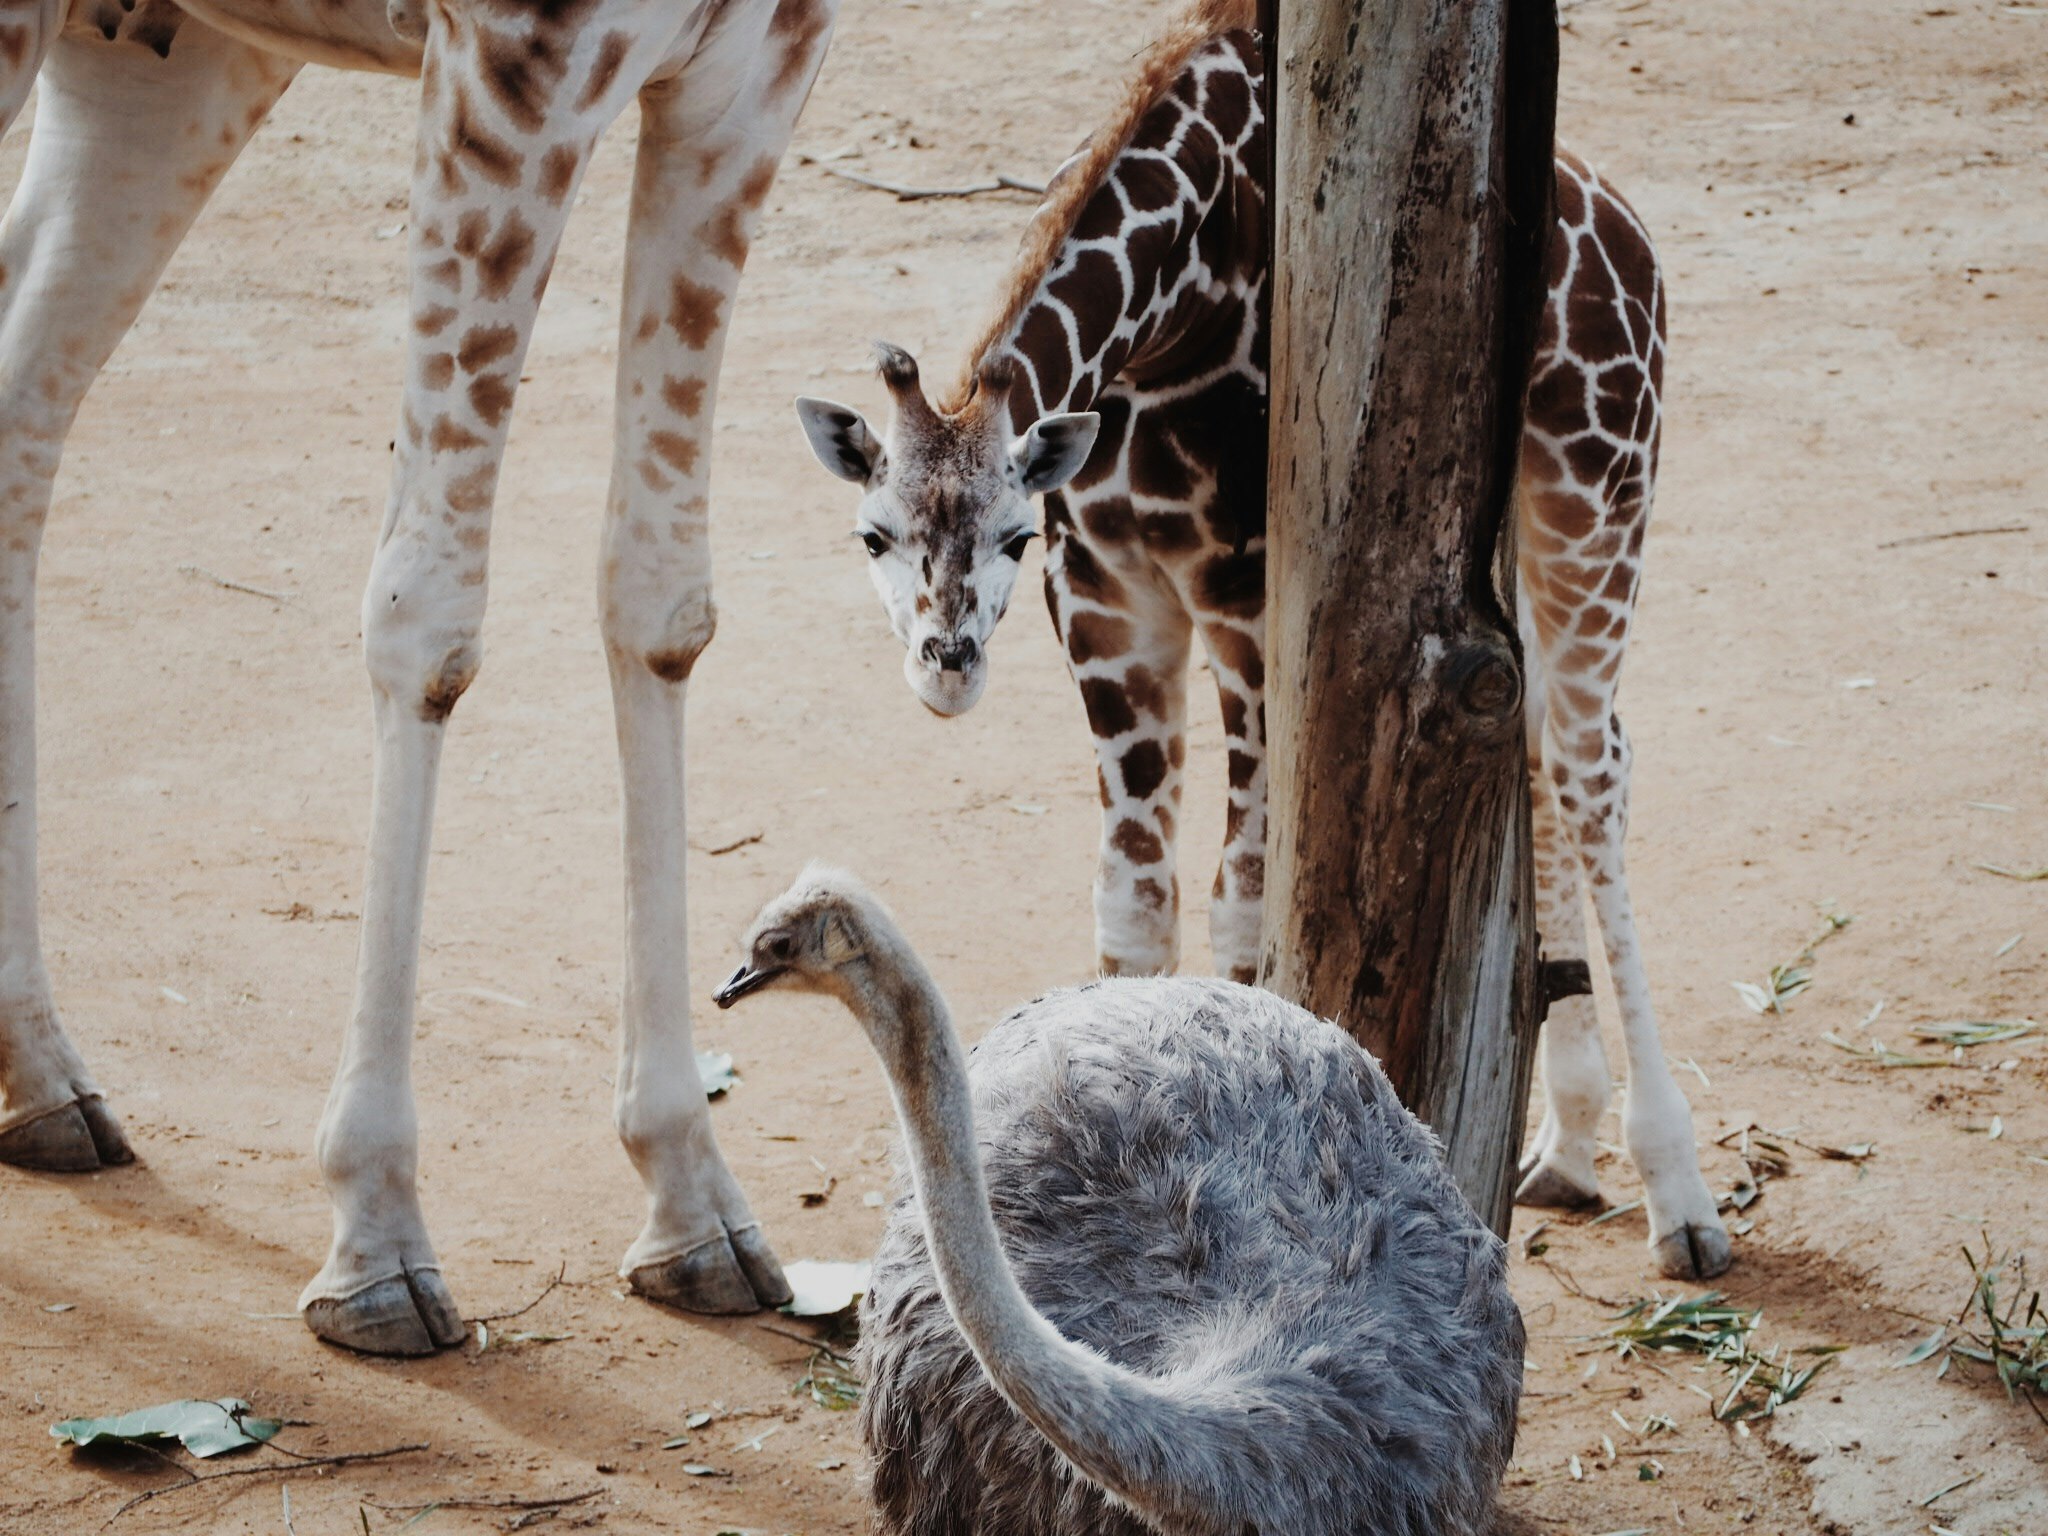 The Ostrich and the Giraffe